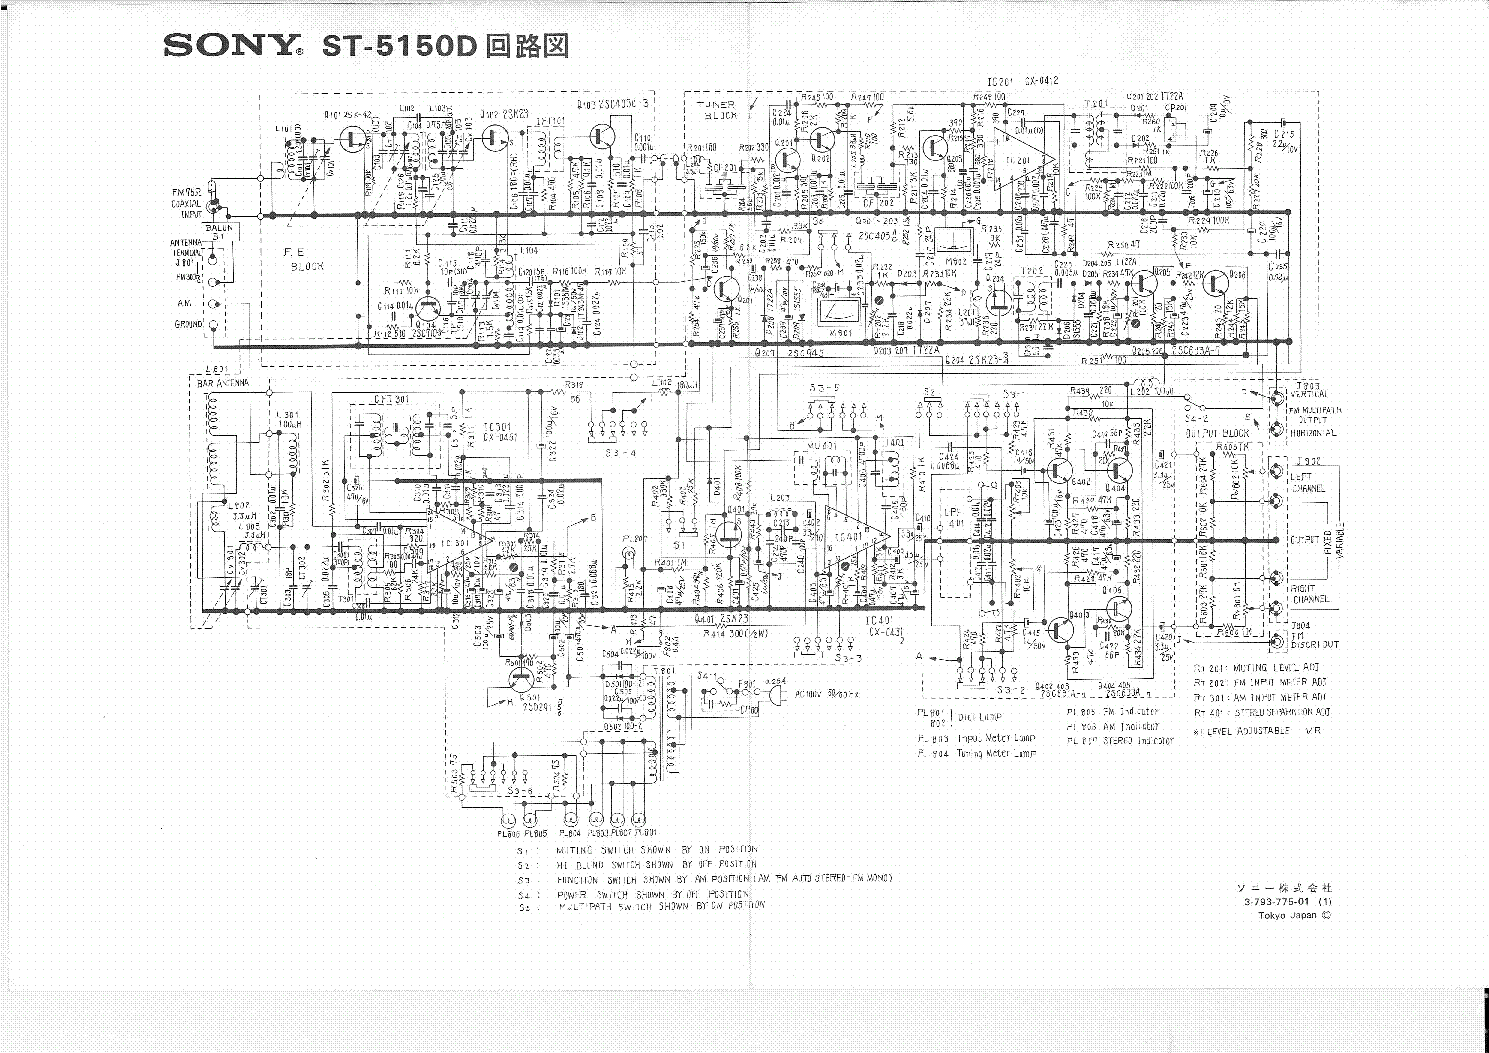 SONY ST-5150D SCHEMATIC service manual (1st page)